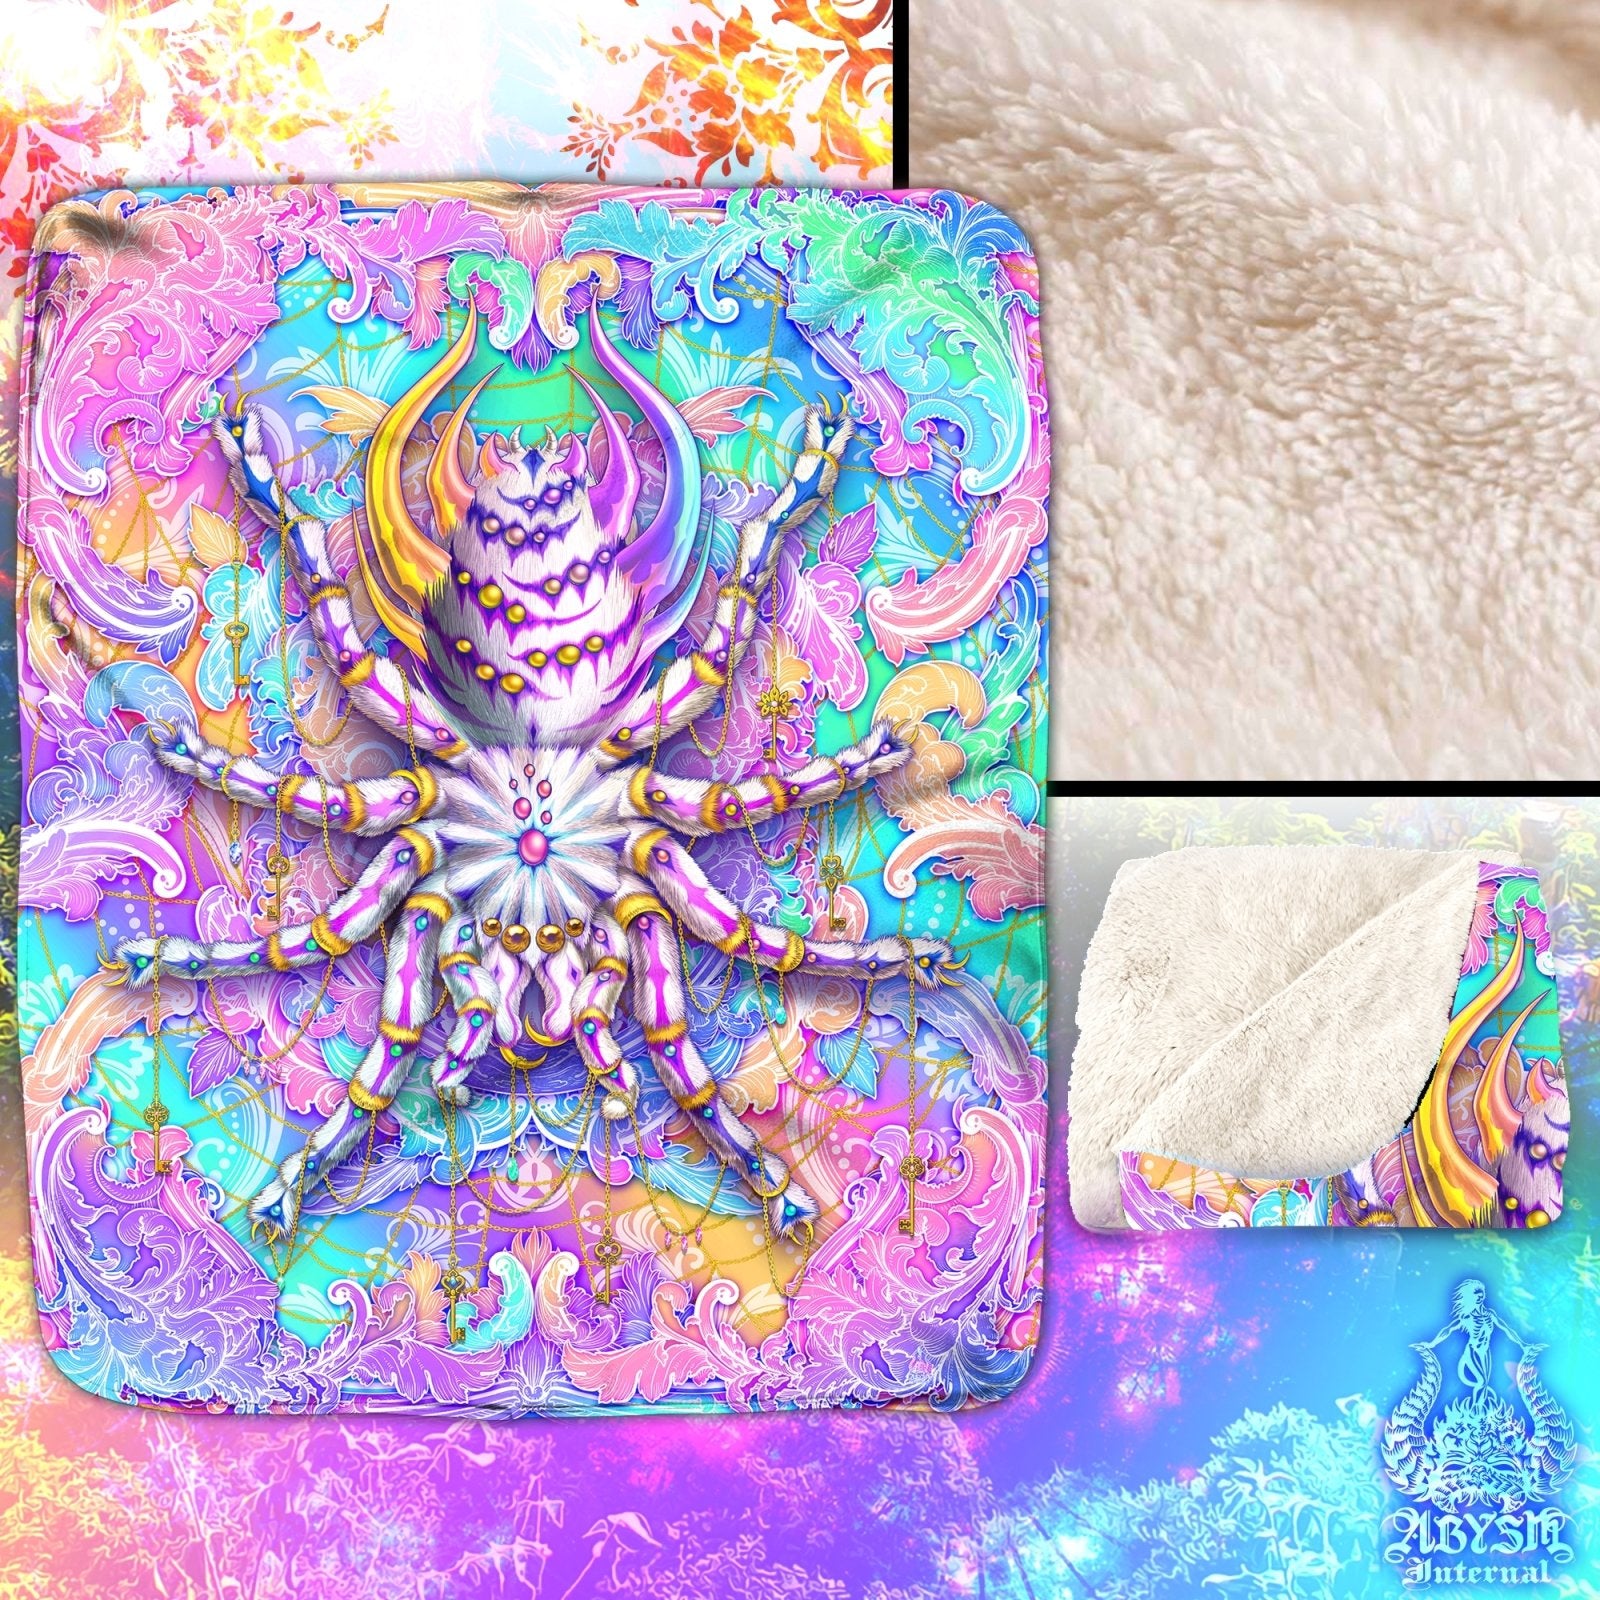 Aesthetic Throw Fleece Blanket, Holographic Pastel Home Decor, Psychedelic Gift, Eclectic and Funky Gift - Spider, Tarantula Art - Abysm Internal